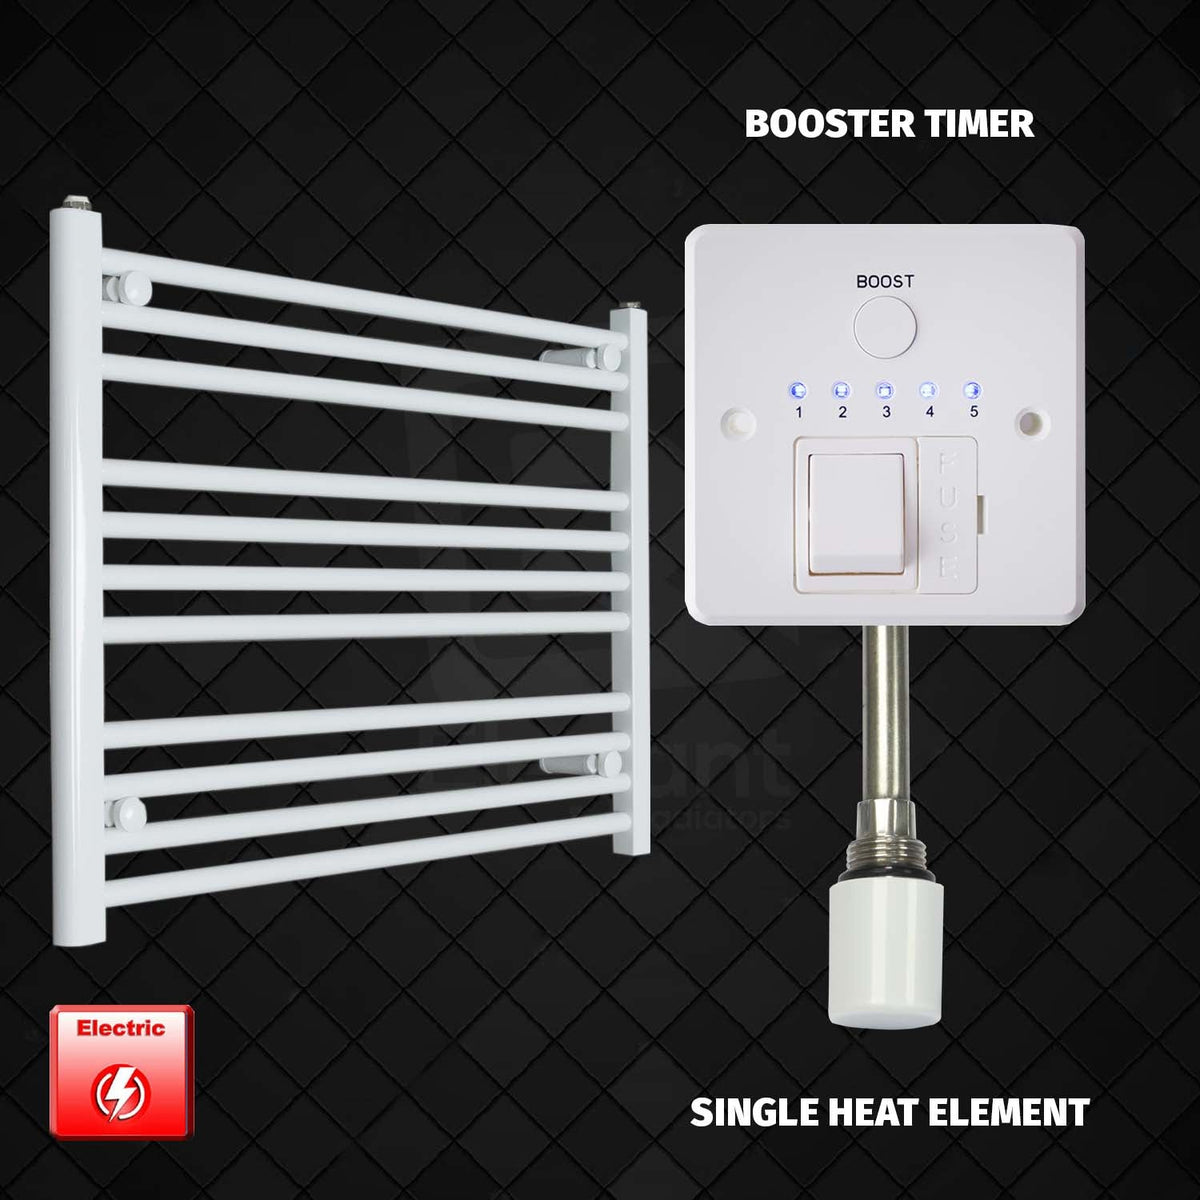 600 x 800 Pre-Filled Electric Heated Towel Radiator White HTR Single heat element Booster timer